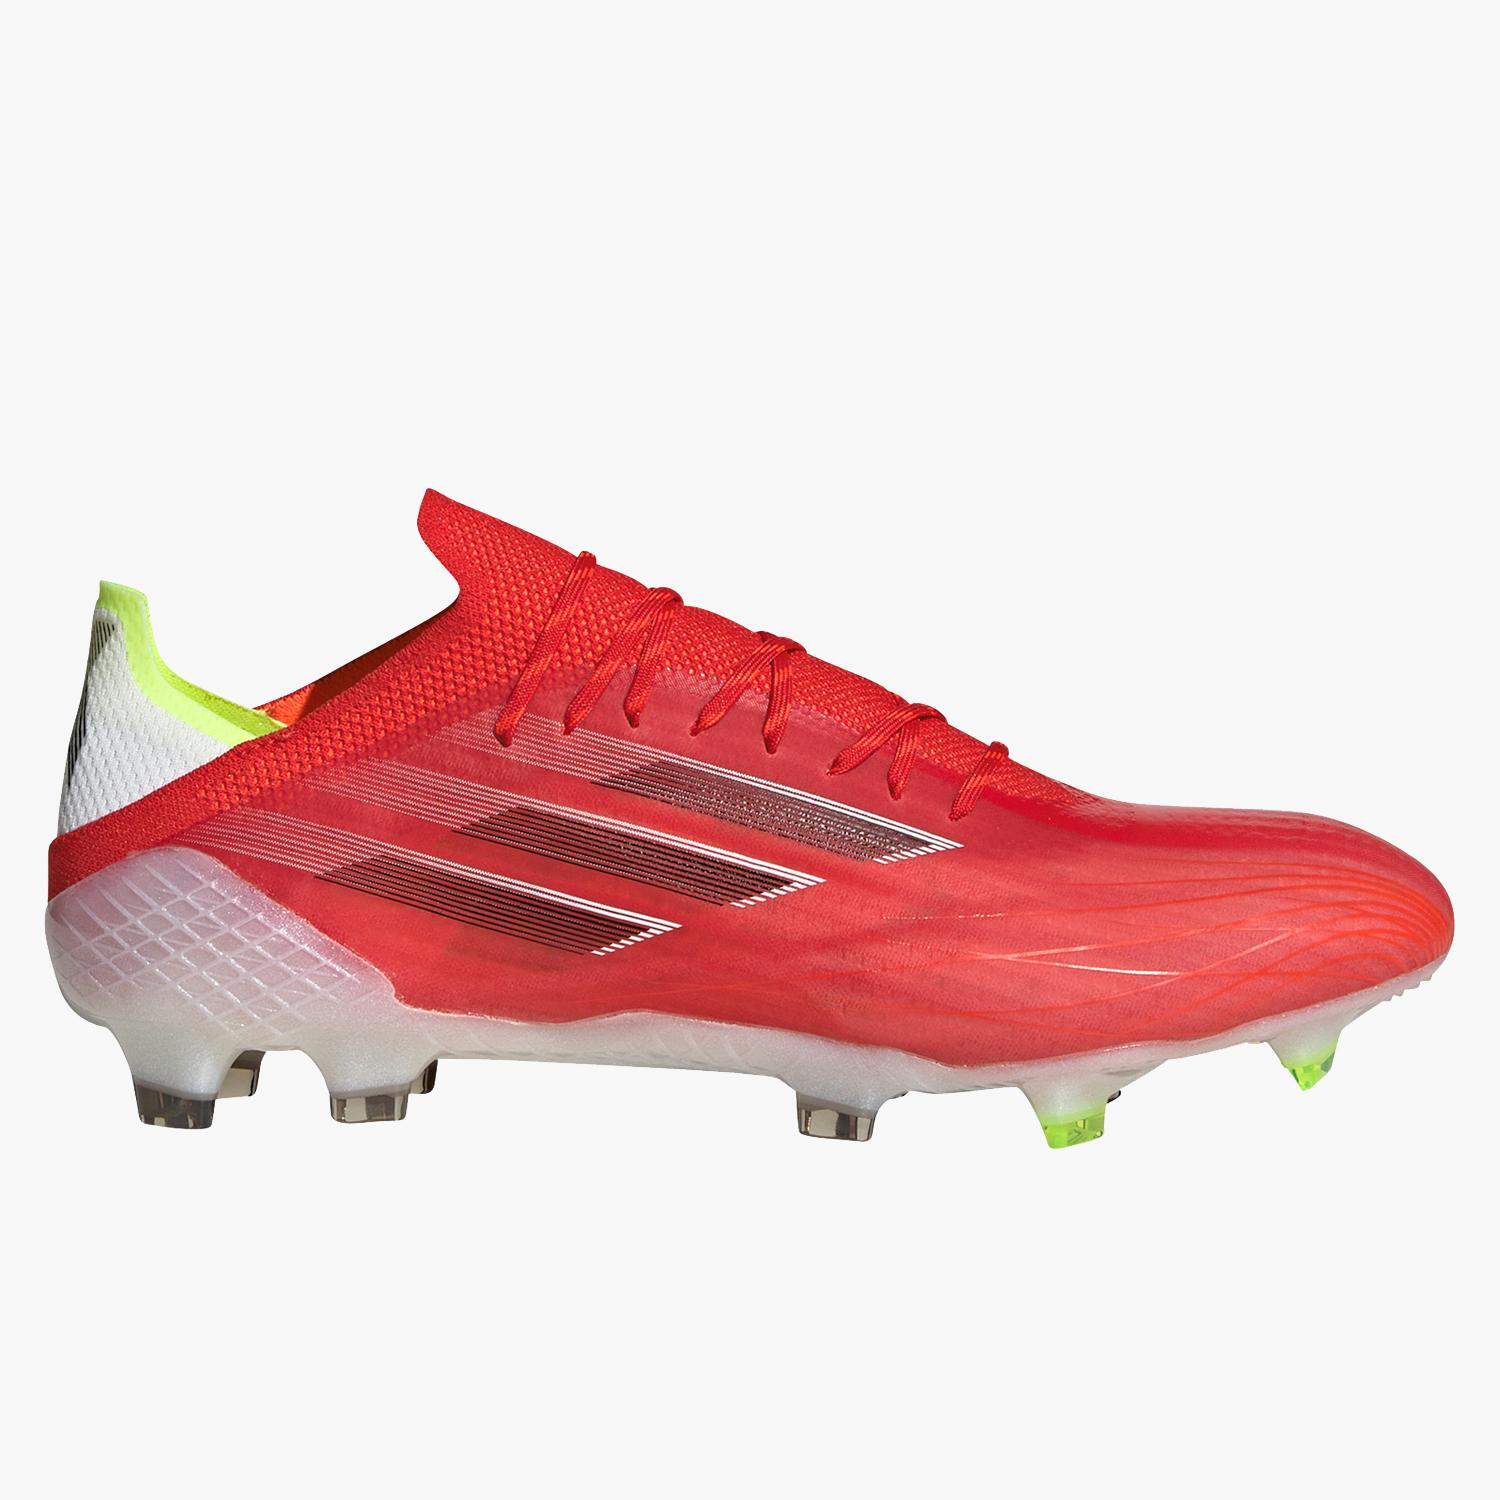 adidas X Speedflow 1 Messi - Rouge - Chaussures de football sports taille 45.5